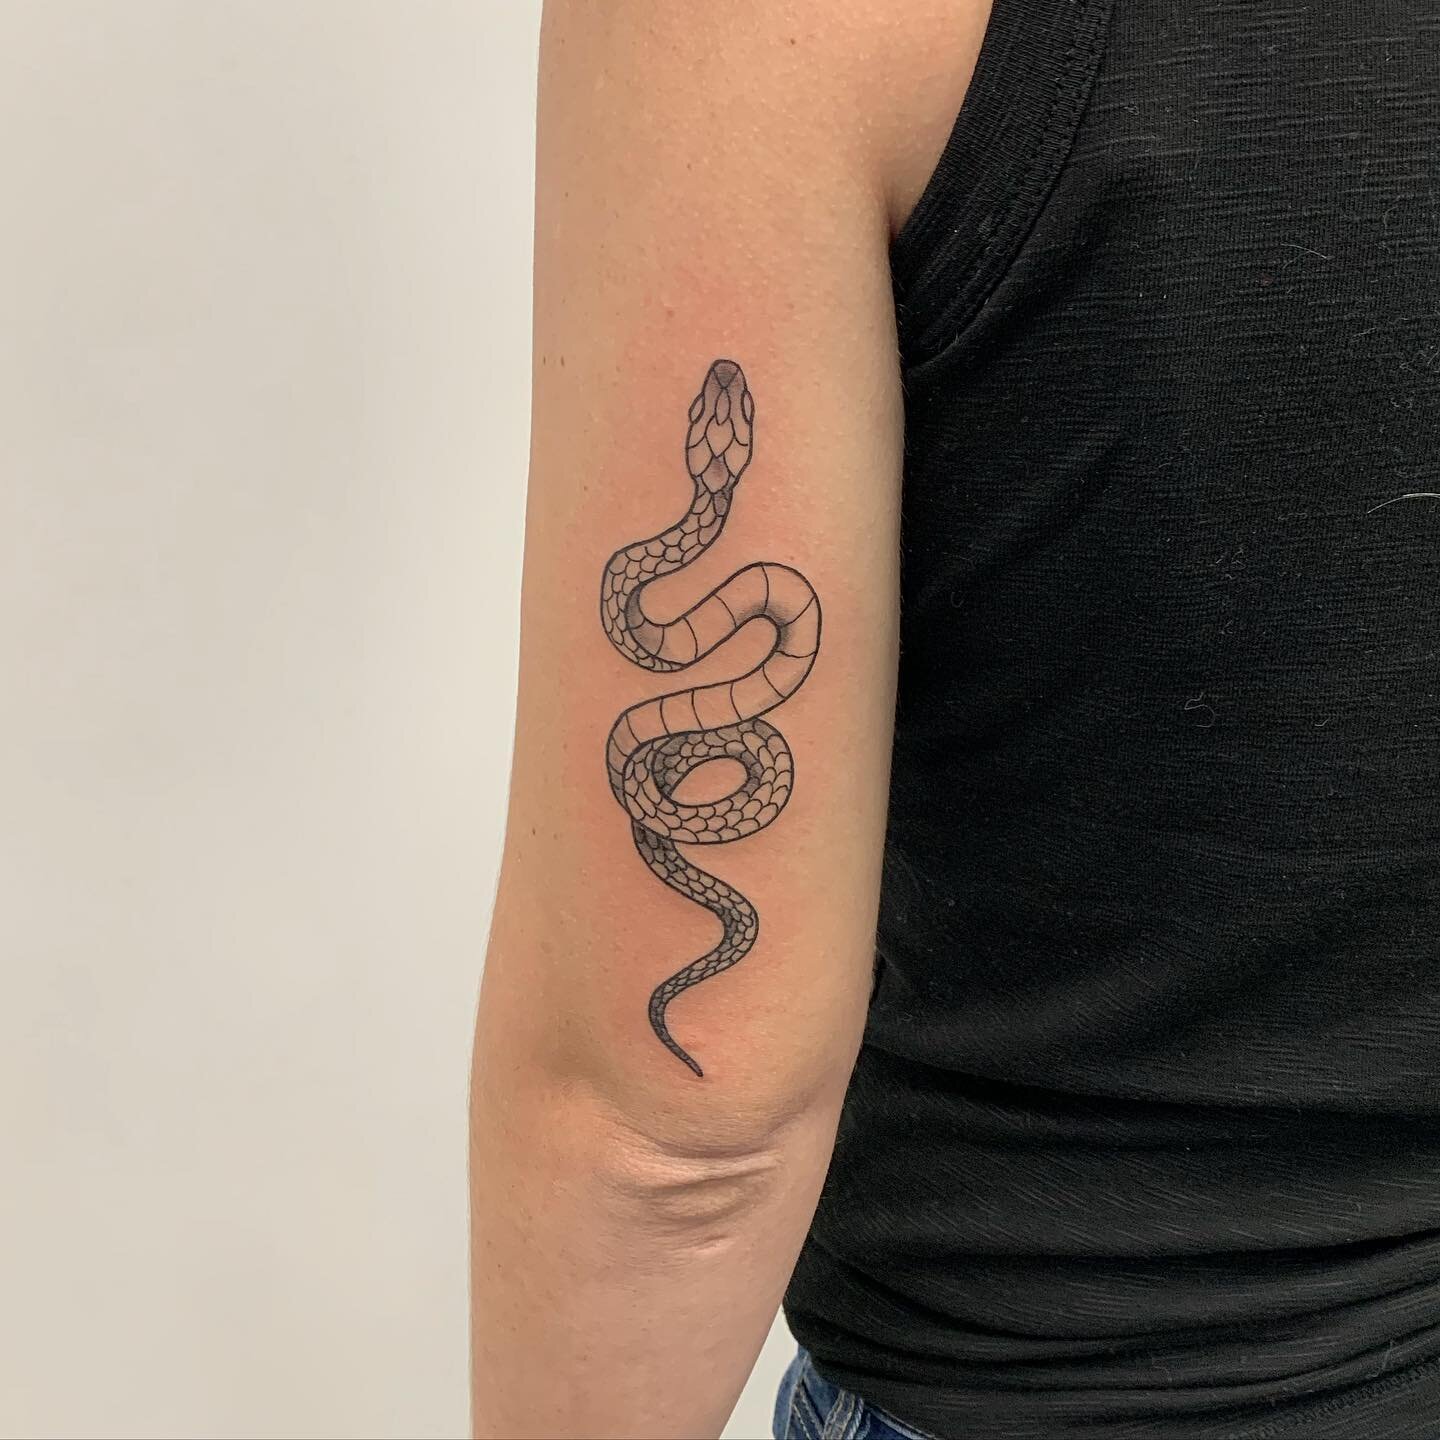 Got to do a couple snakes today for 2 sisters. Thank you ladies!

#tattoo #tattoos #snaketattoo #snaketattoos #theedgetattooct #cttattooartist #cttattoo